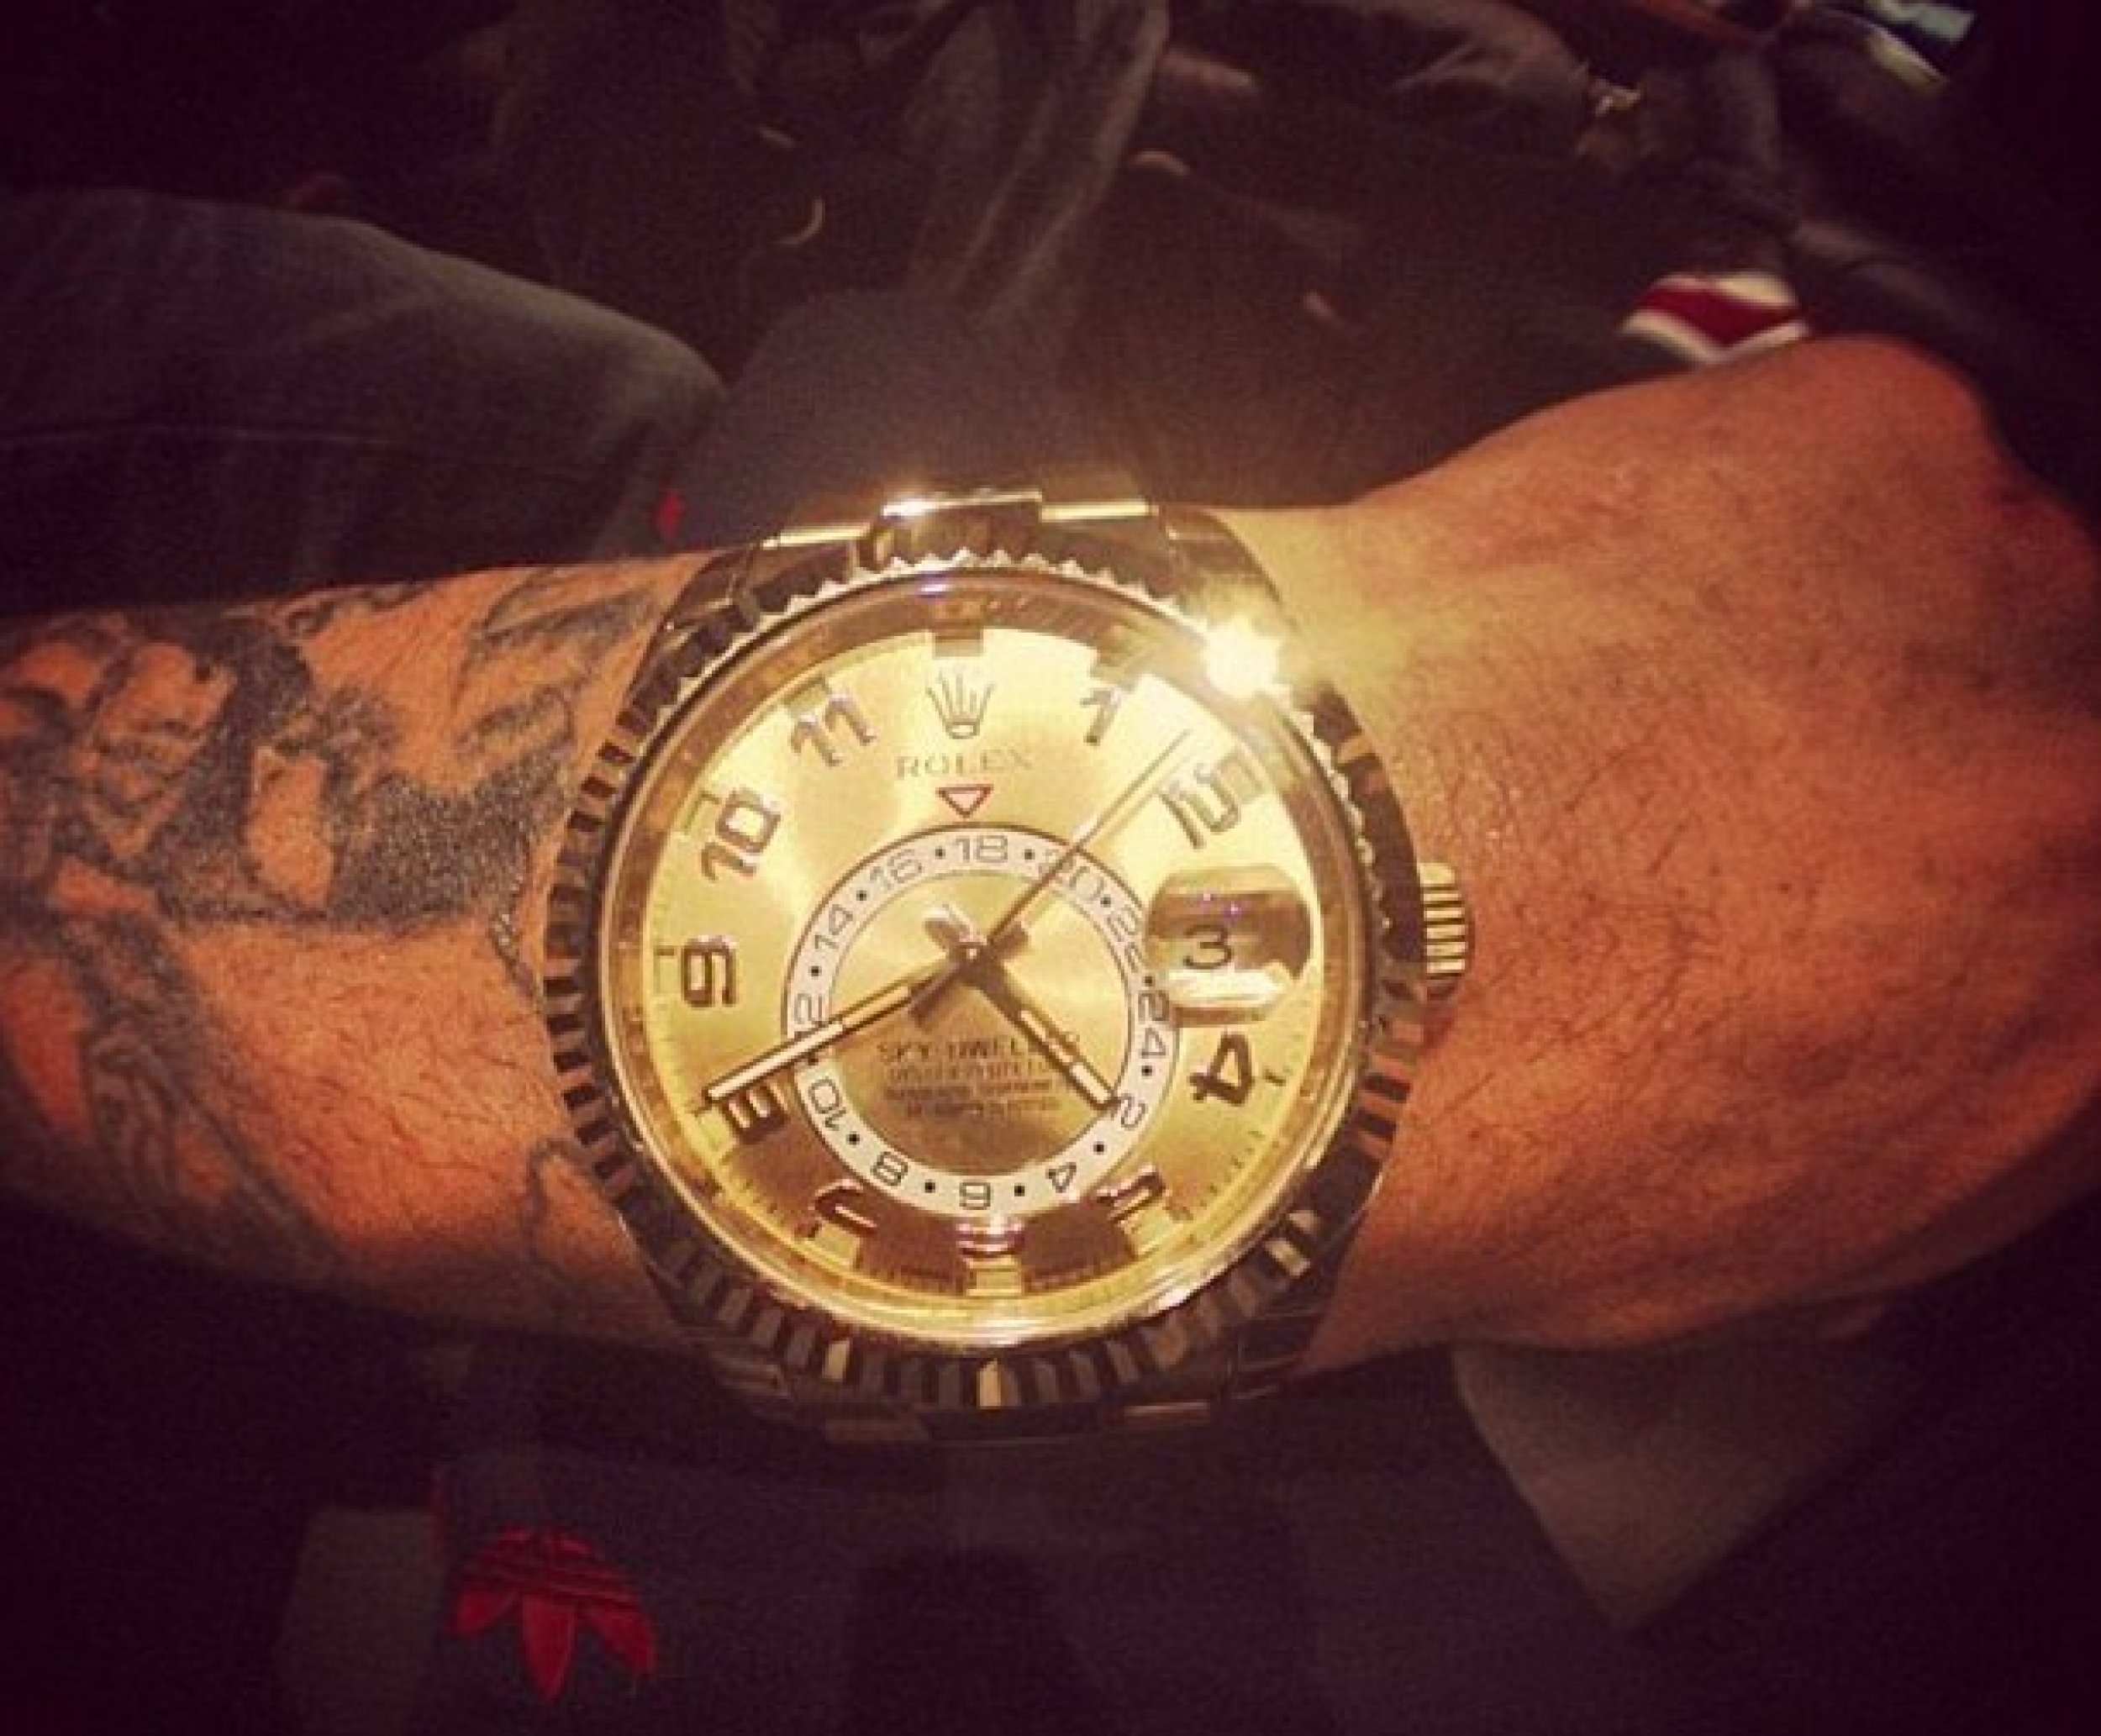 Chris Brown shows off his Rolex